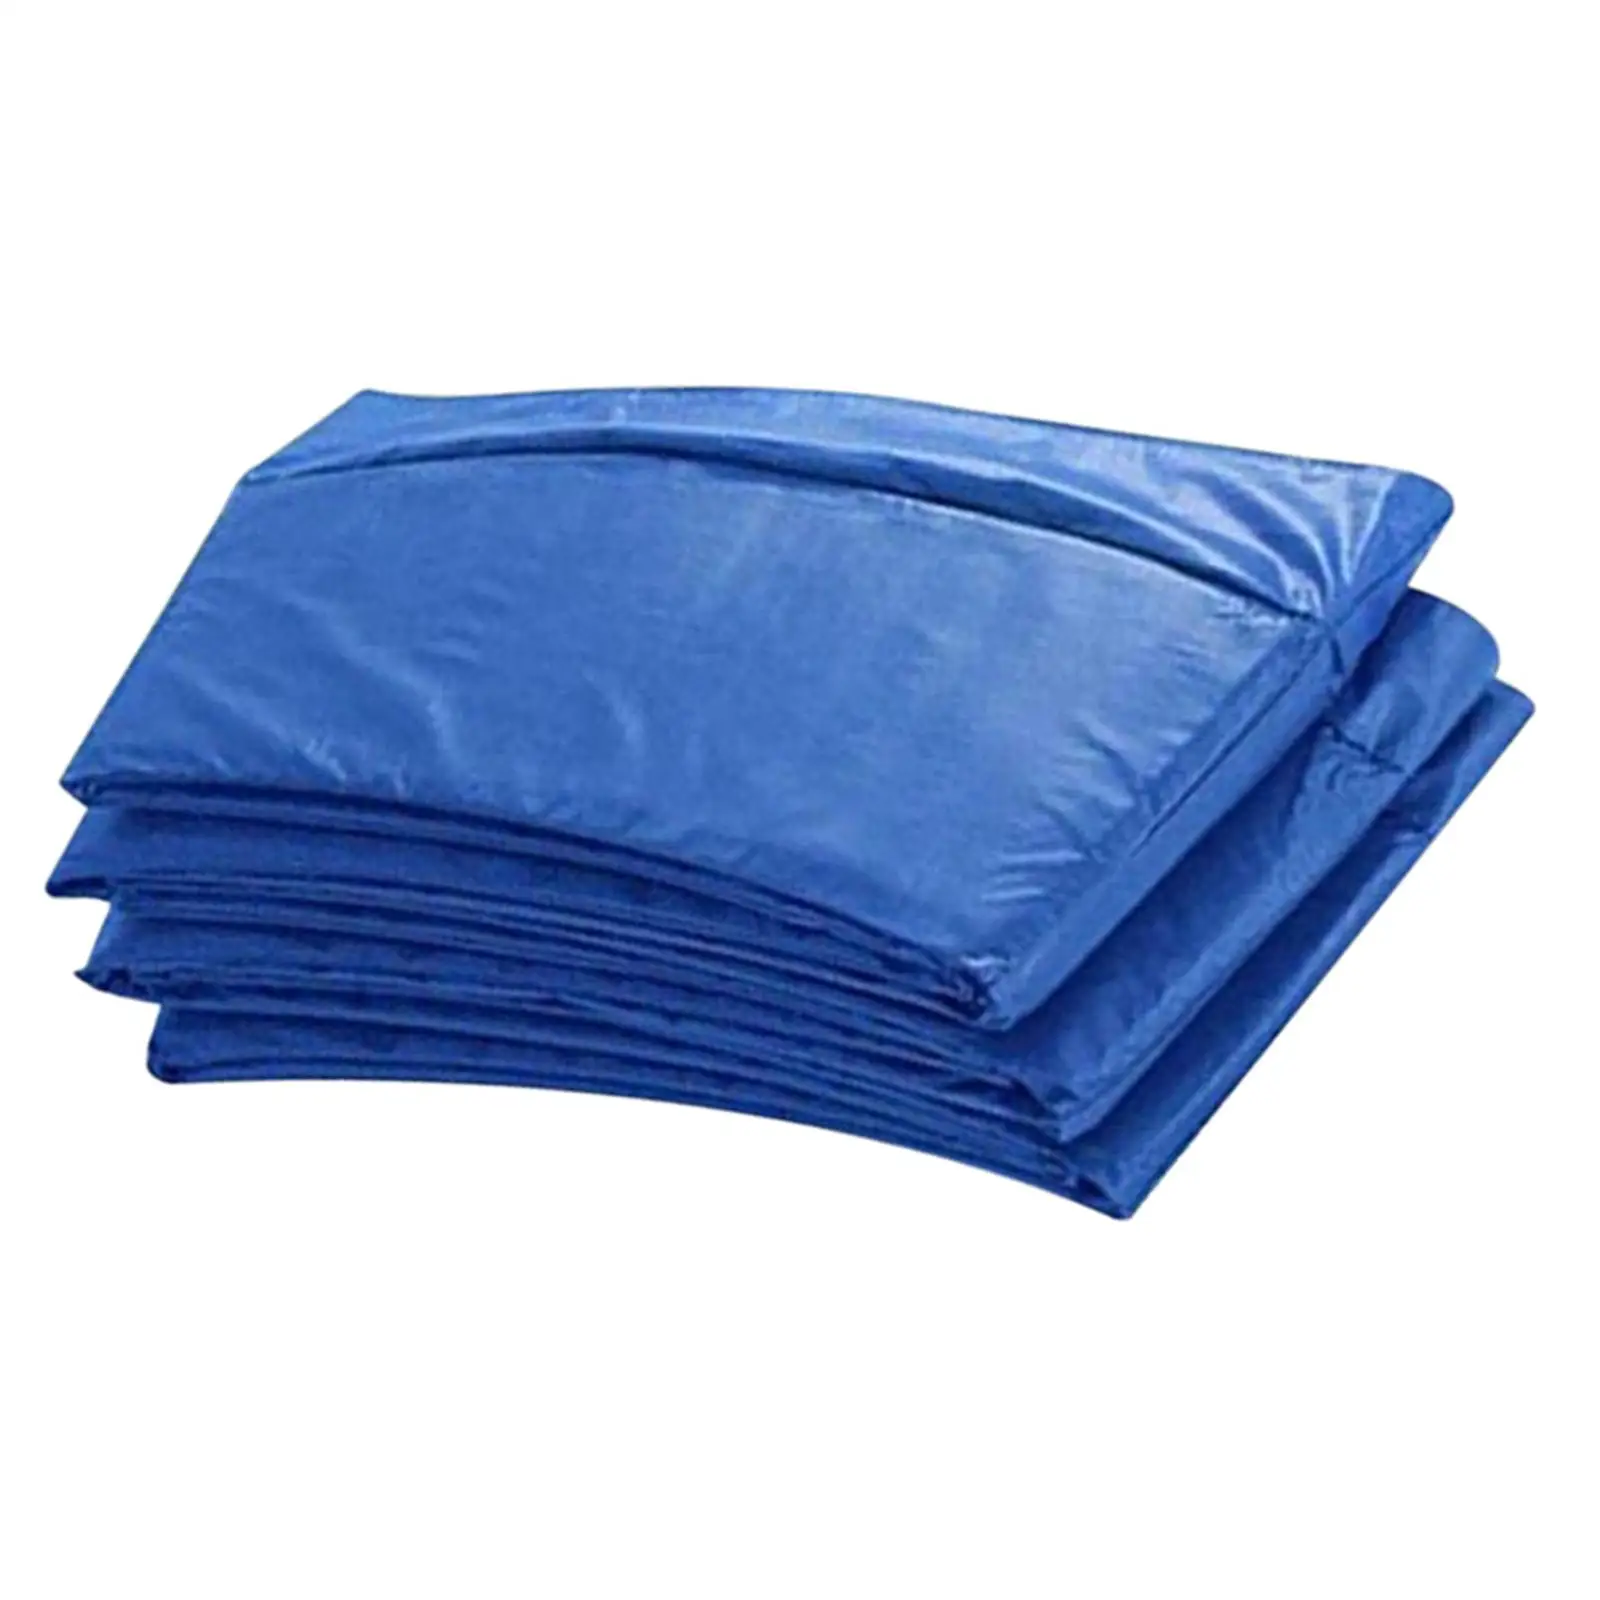 Trampoline Pad Replacement Trampoline Parts Sun Protection Spring Side Cover